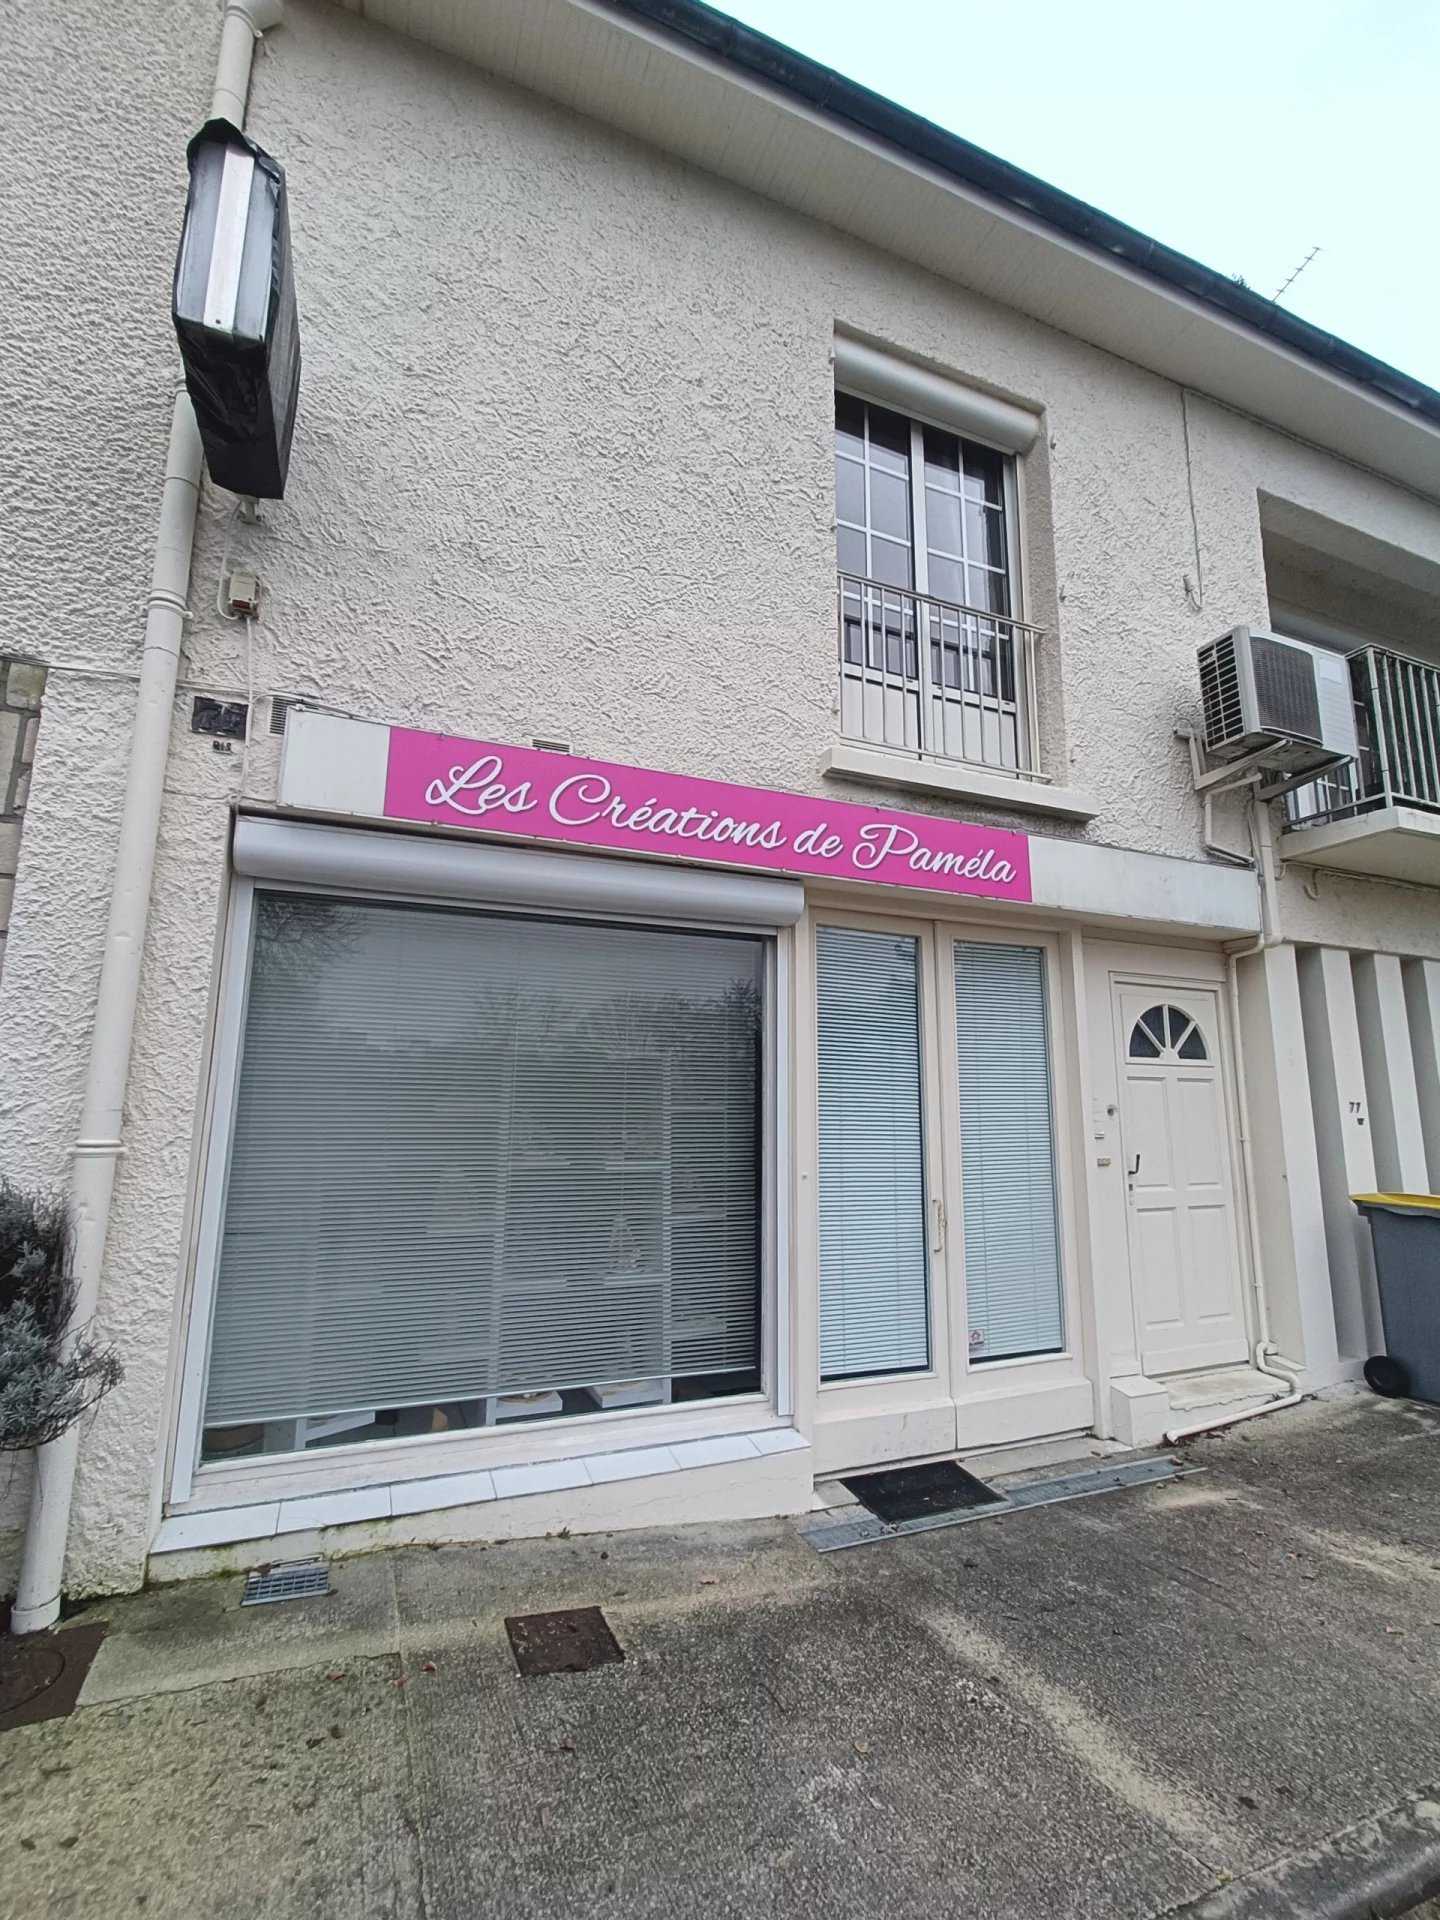 Retail in Poitiers, Nouvelle-Aquitaine 12500436